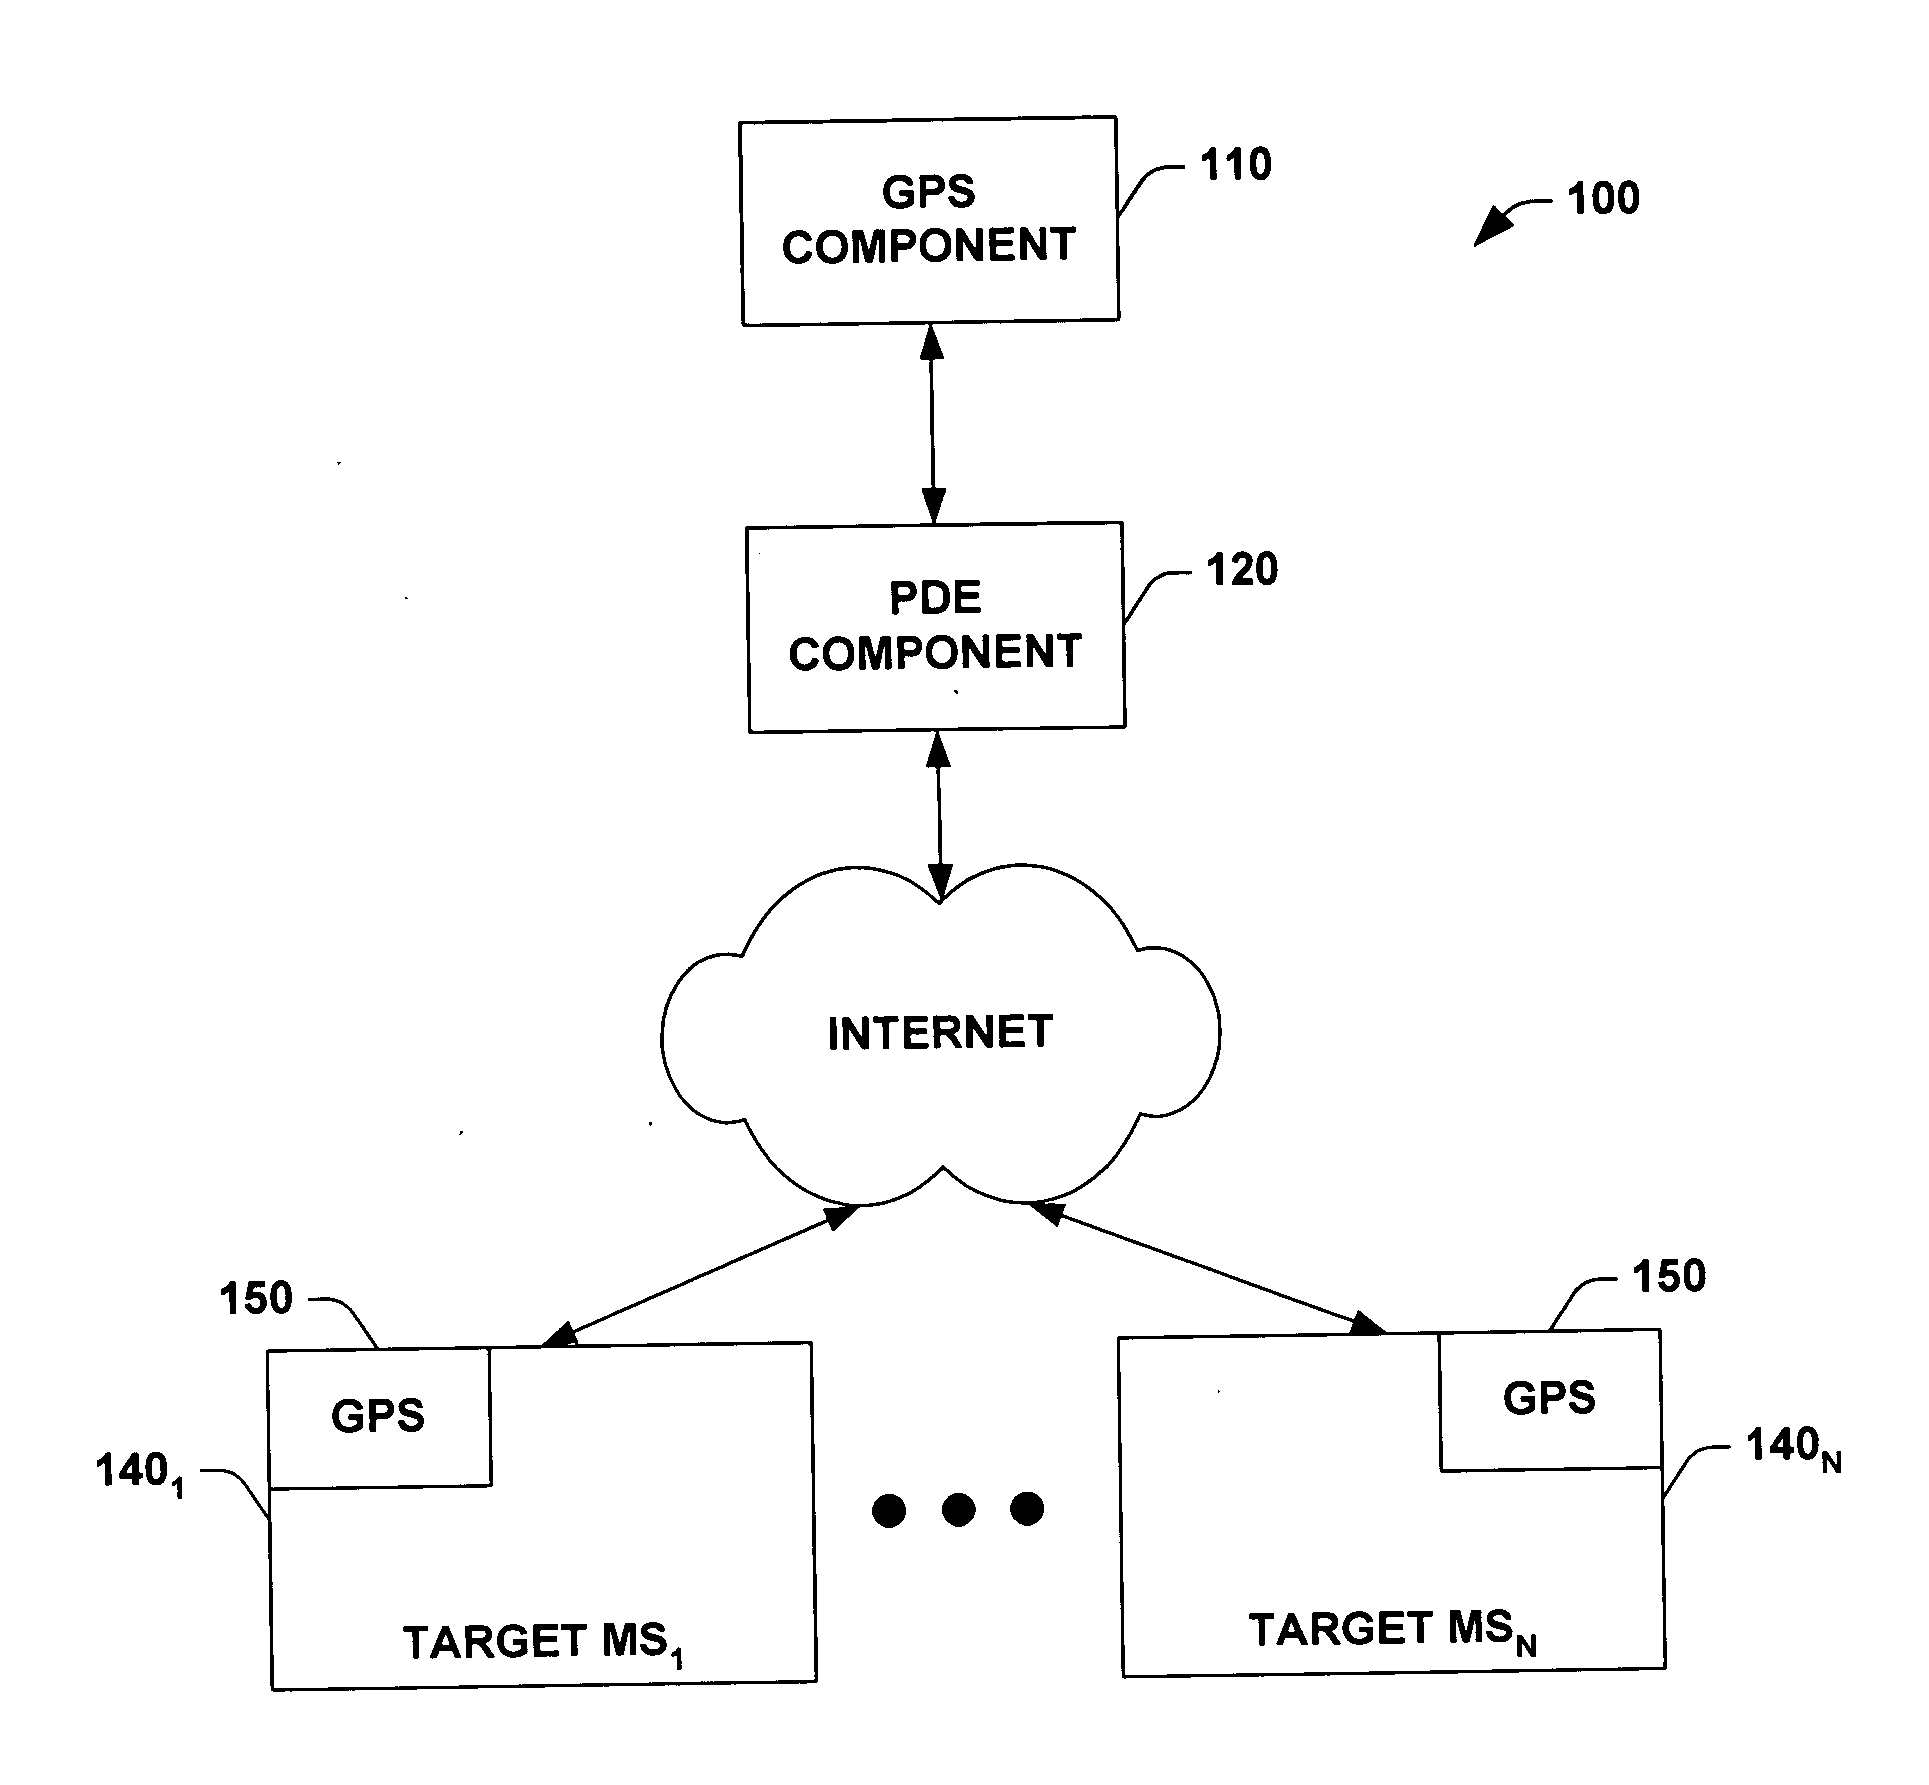 IP-based location service within code division multiple access network